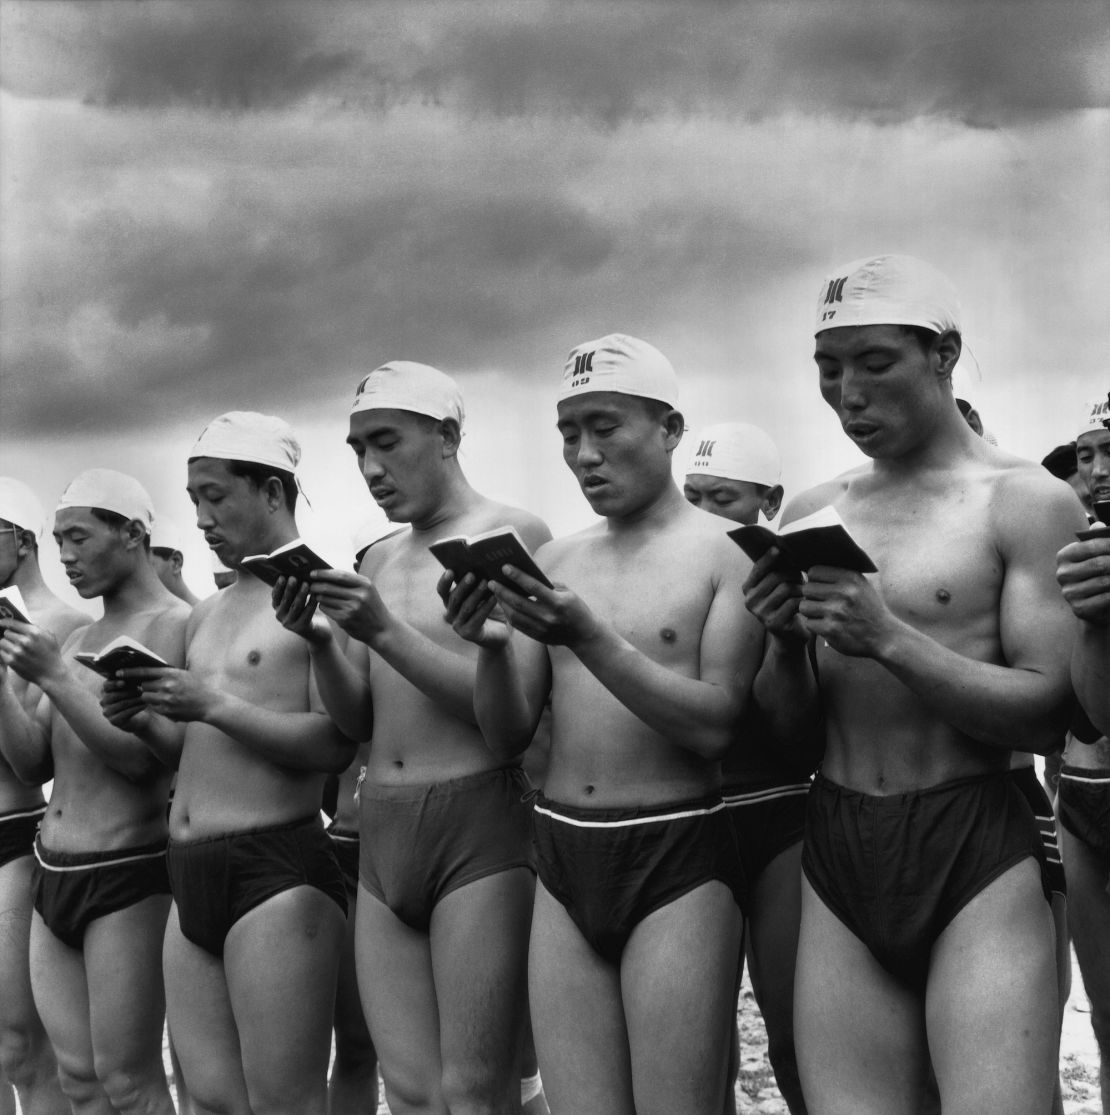 Swimmers read from Mao's "Little Red Book" as they prepare to commemorate the second anniversary of the leader's famous swim in the Yangtze.